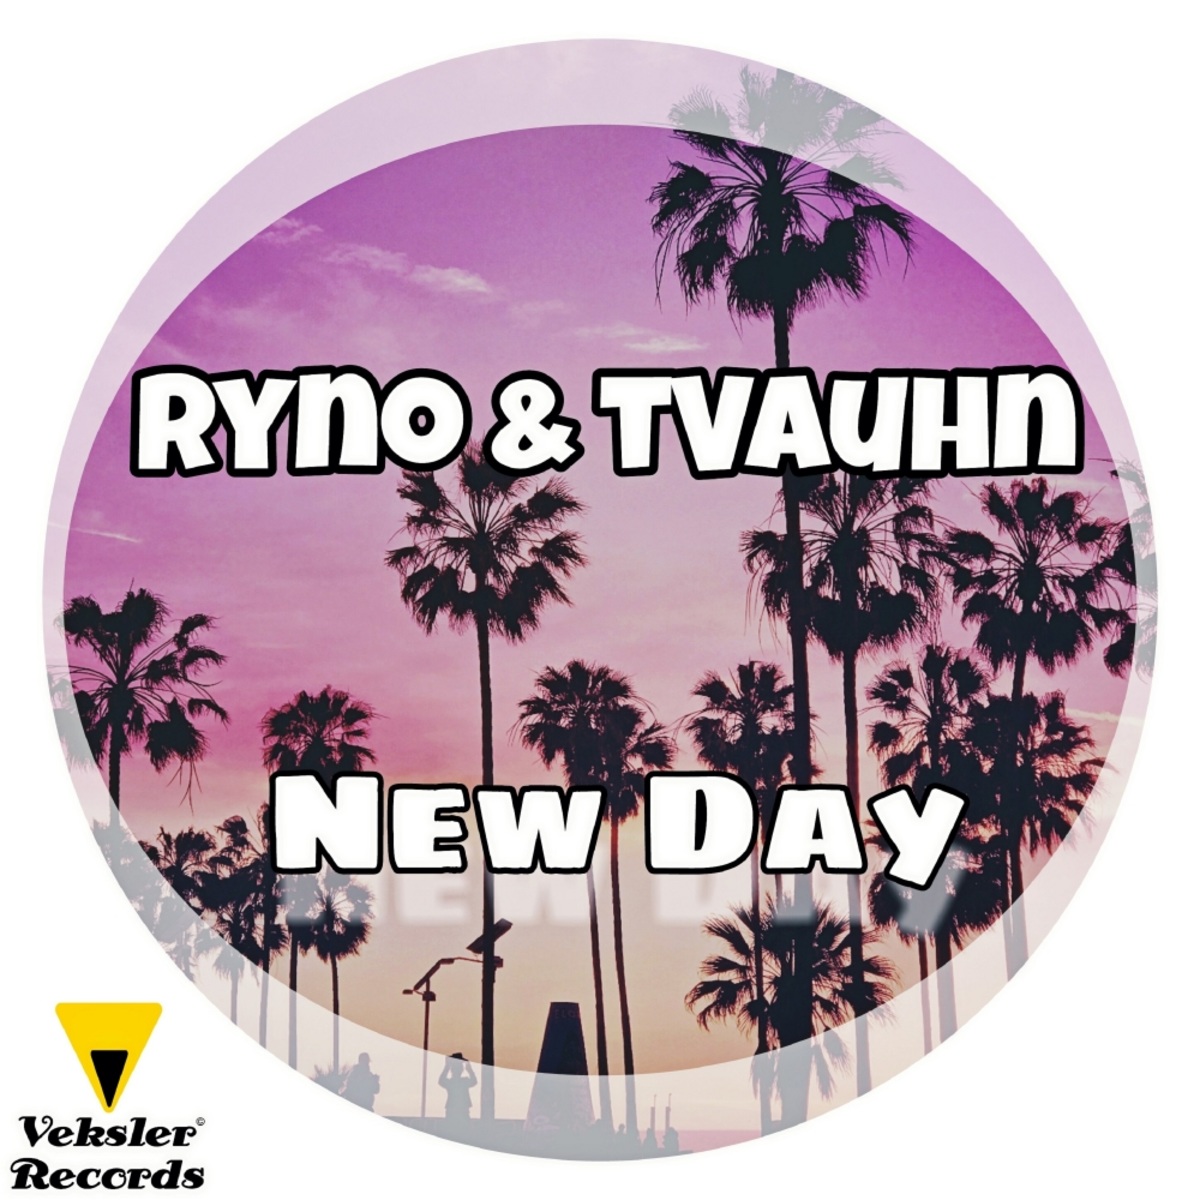 Ryno & tVauhn - New Day / Veksler Records